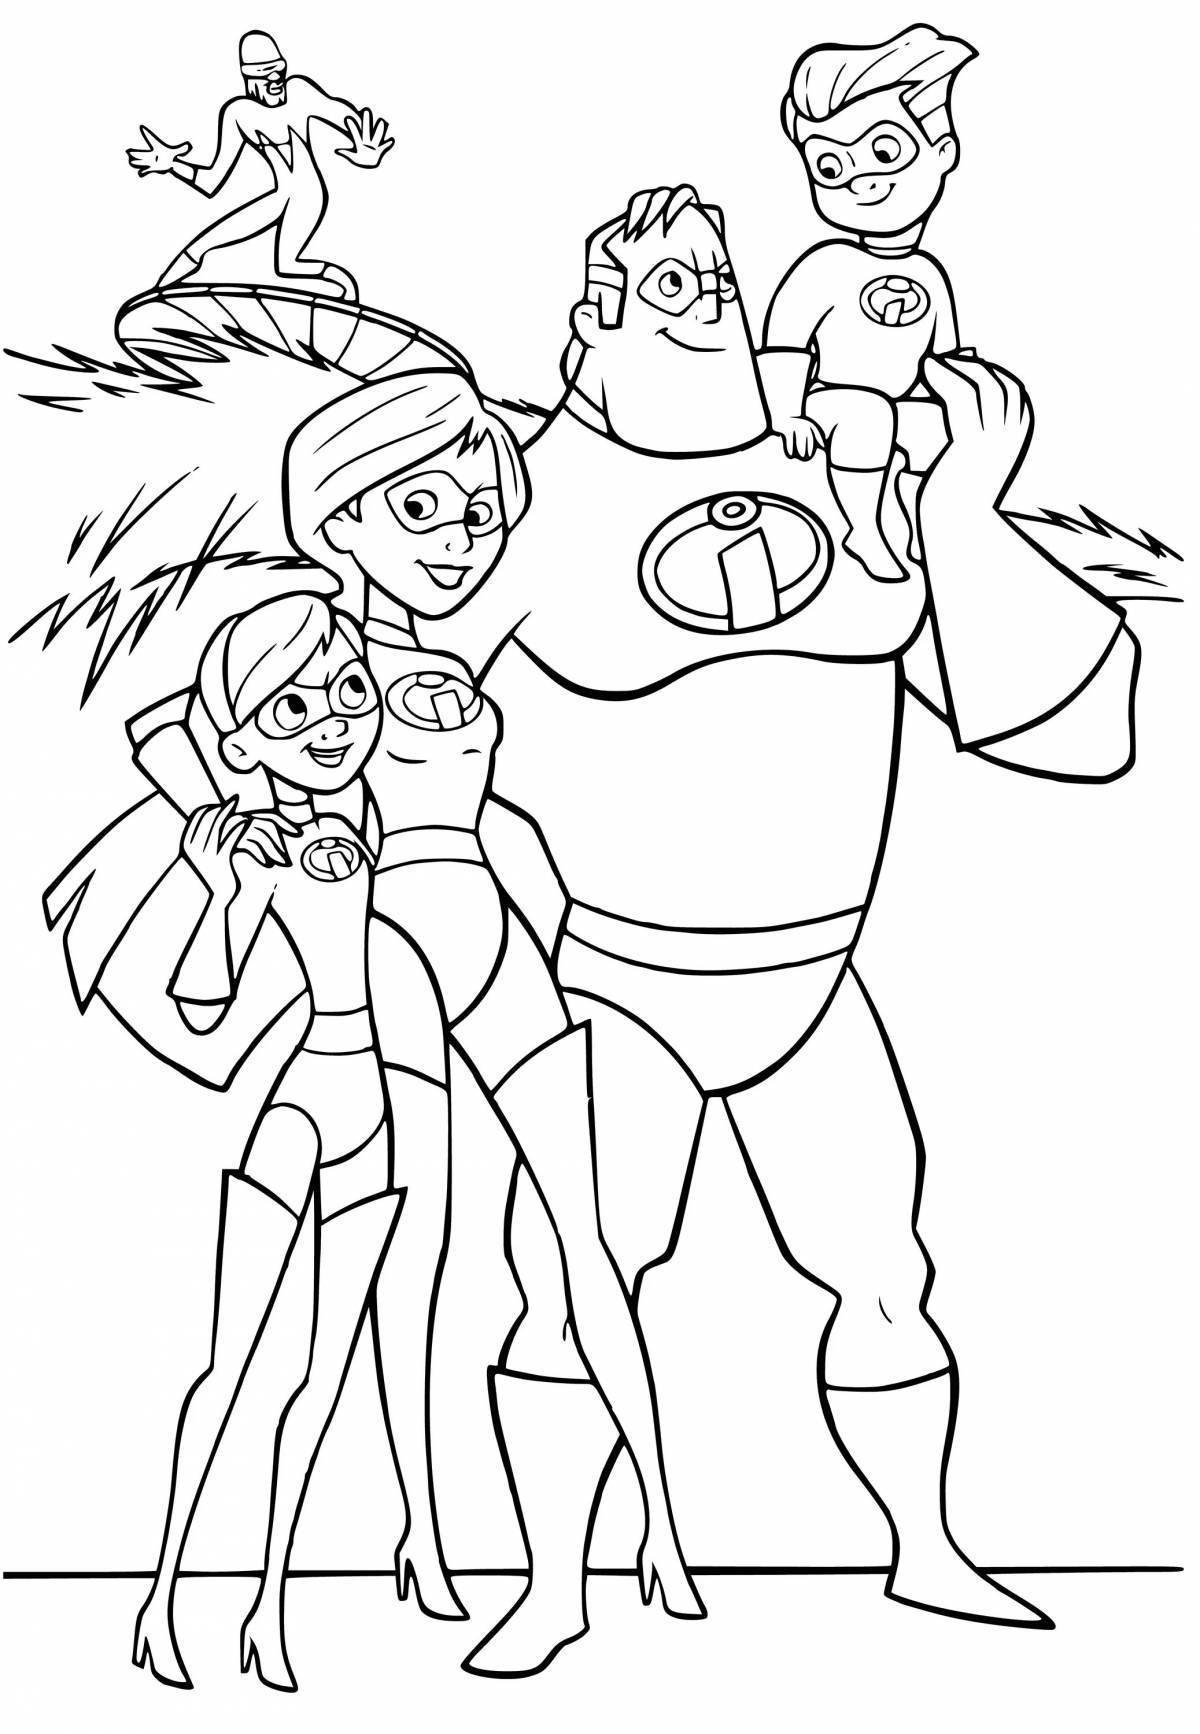 Innovative Incredibles coloring book for kids